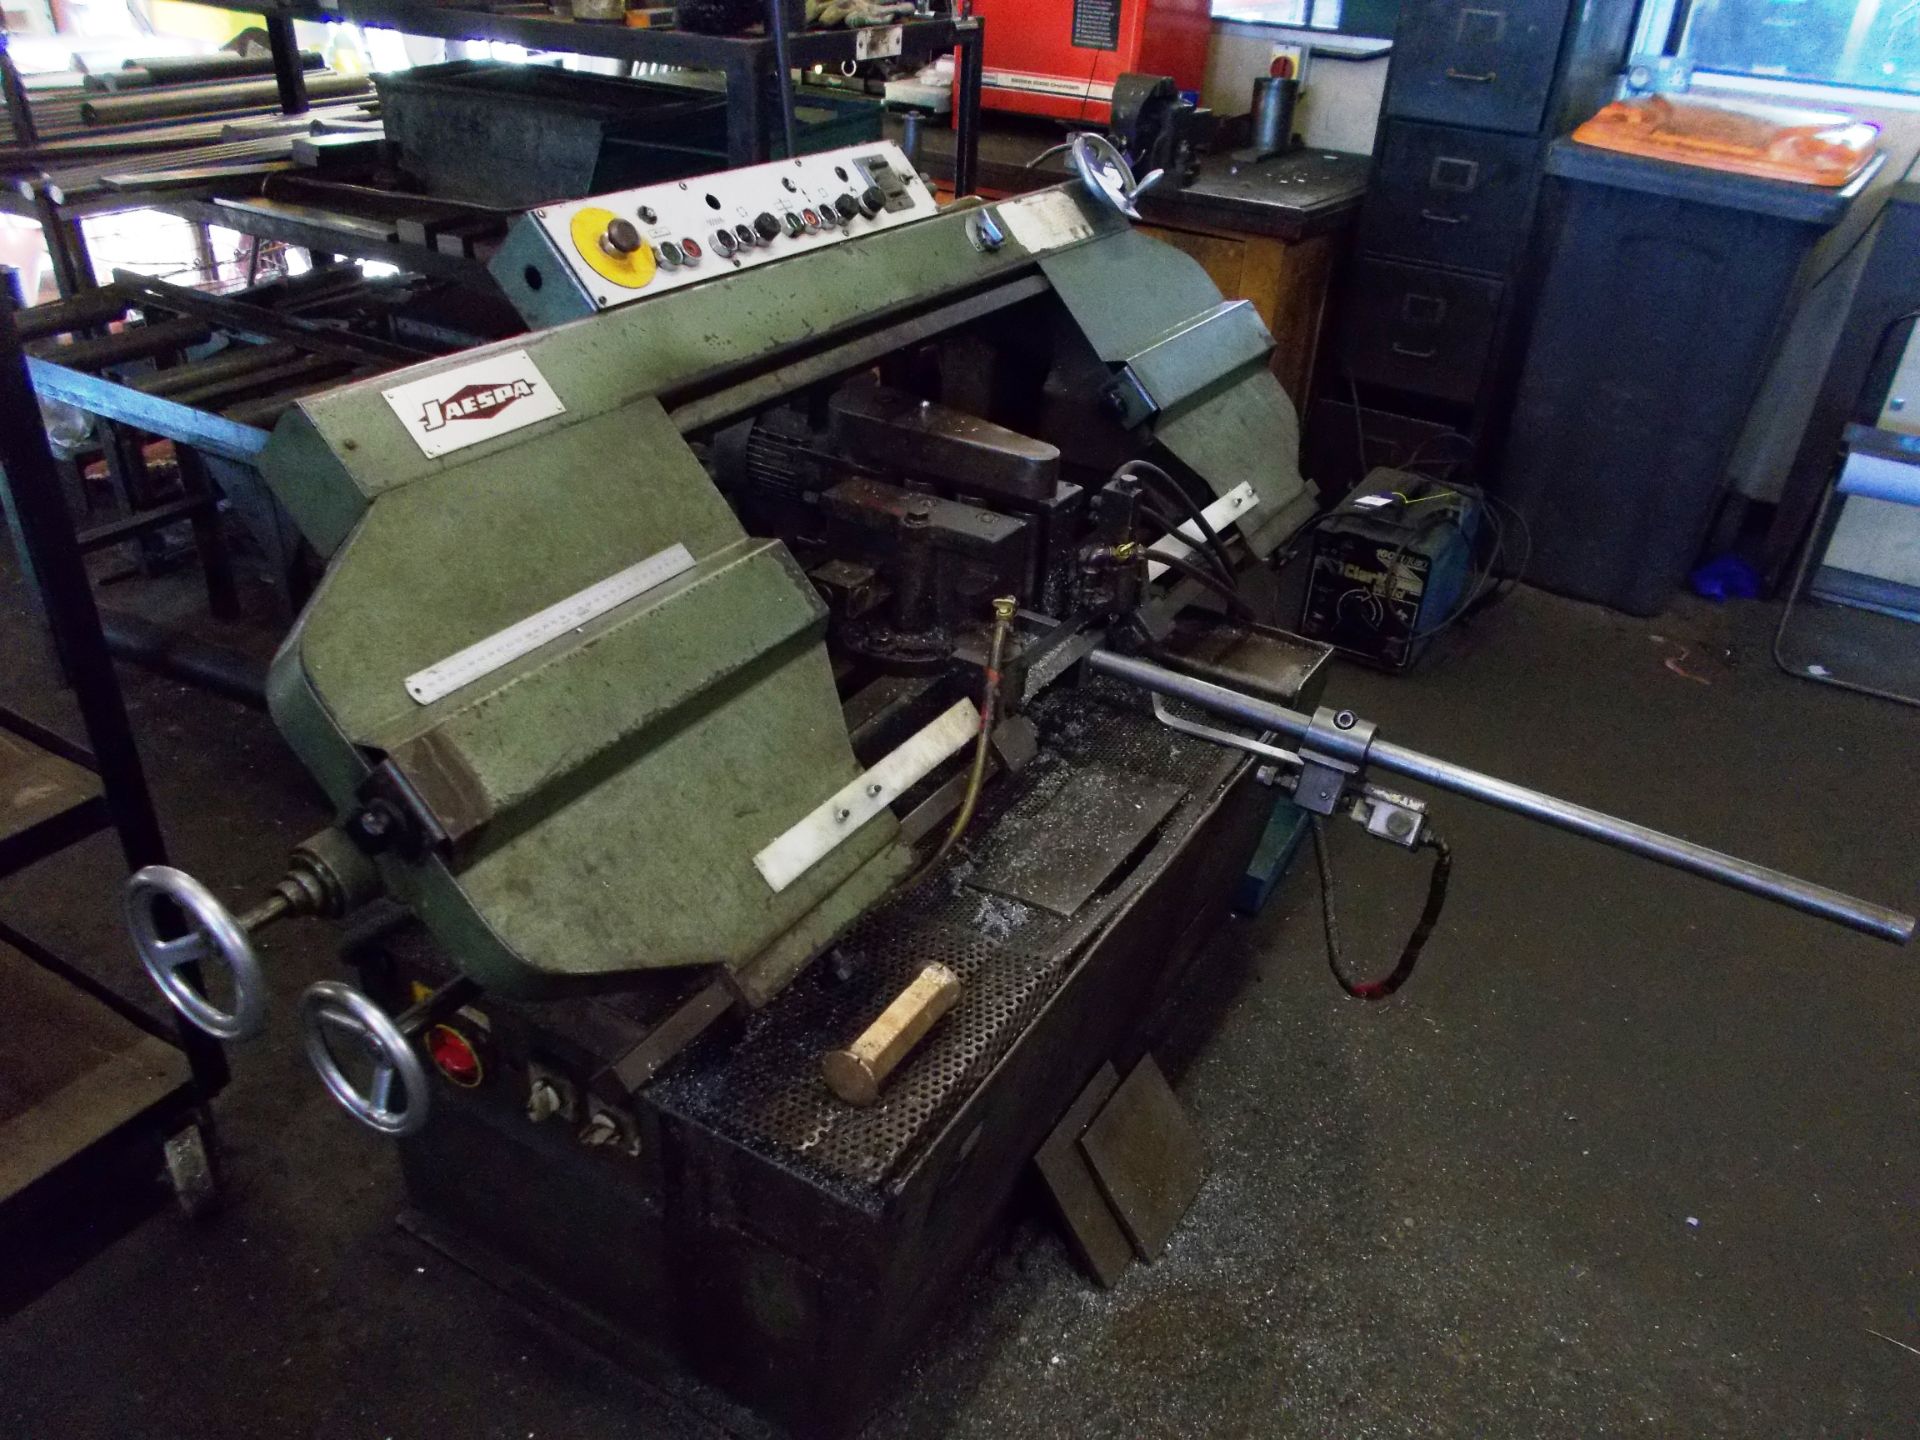 Jaespa W260A horizontal band saw (Machine number: 776802) with roller feed table - Image 2 of 3